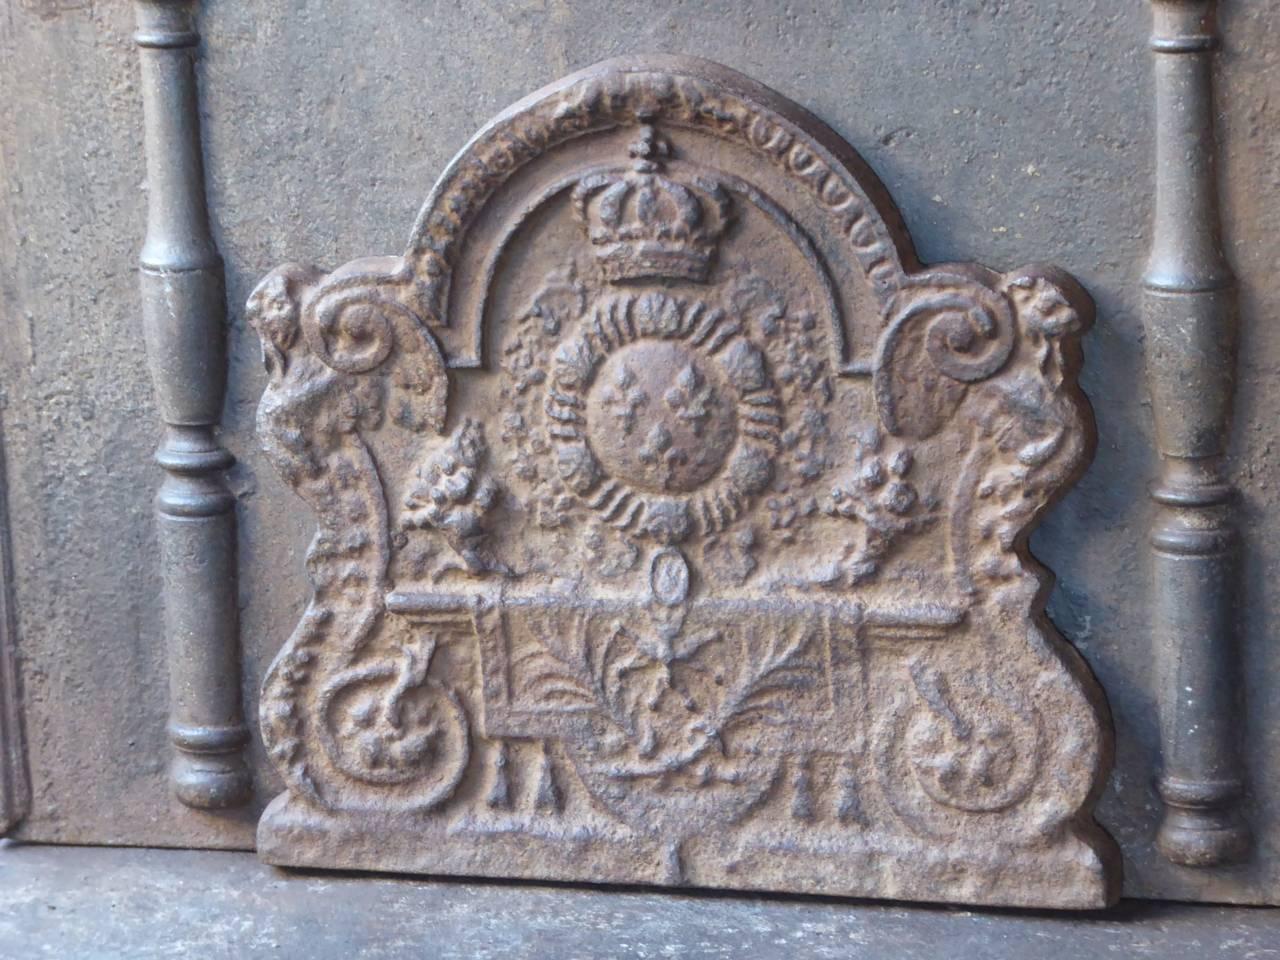 French fireback with the arms of France. Arms of the House of Bourbon, an originally French royal house that became a major dynasty in Europe. It delivered kings for Spain (Navarra), France, both Sicilies and Parma. Bourbon kings ruled France from